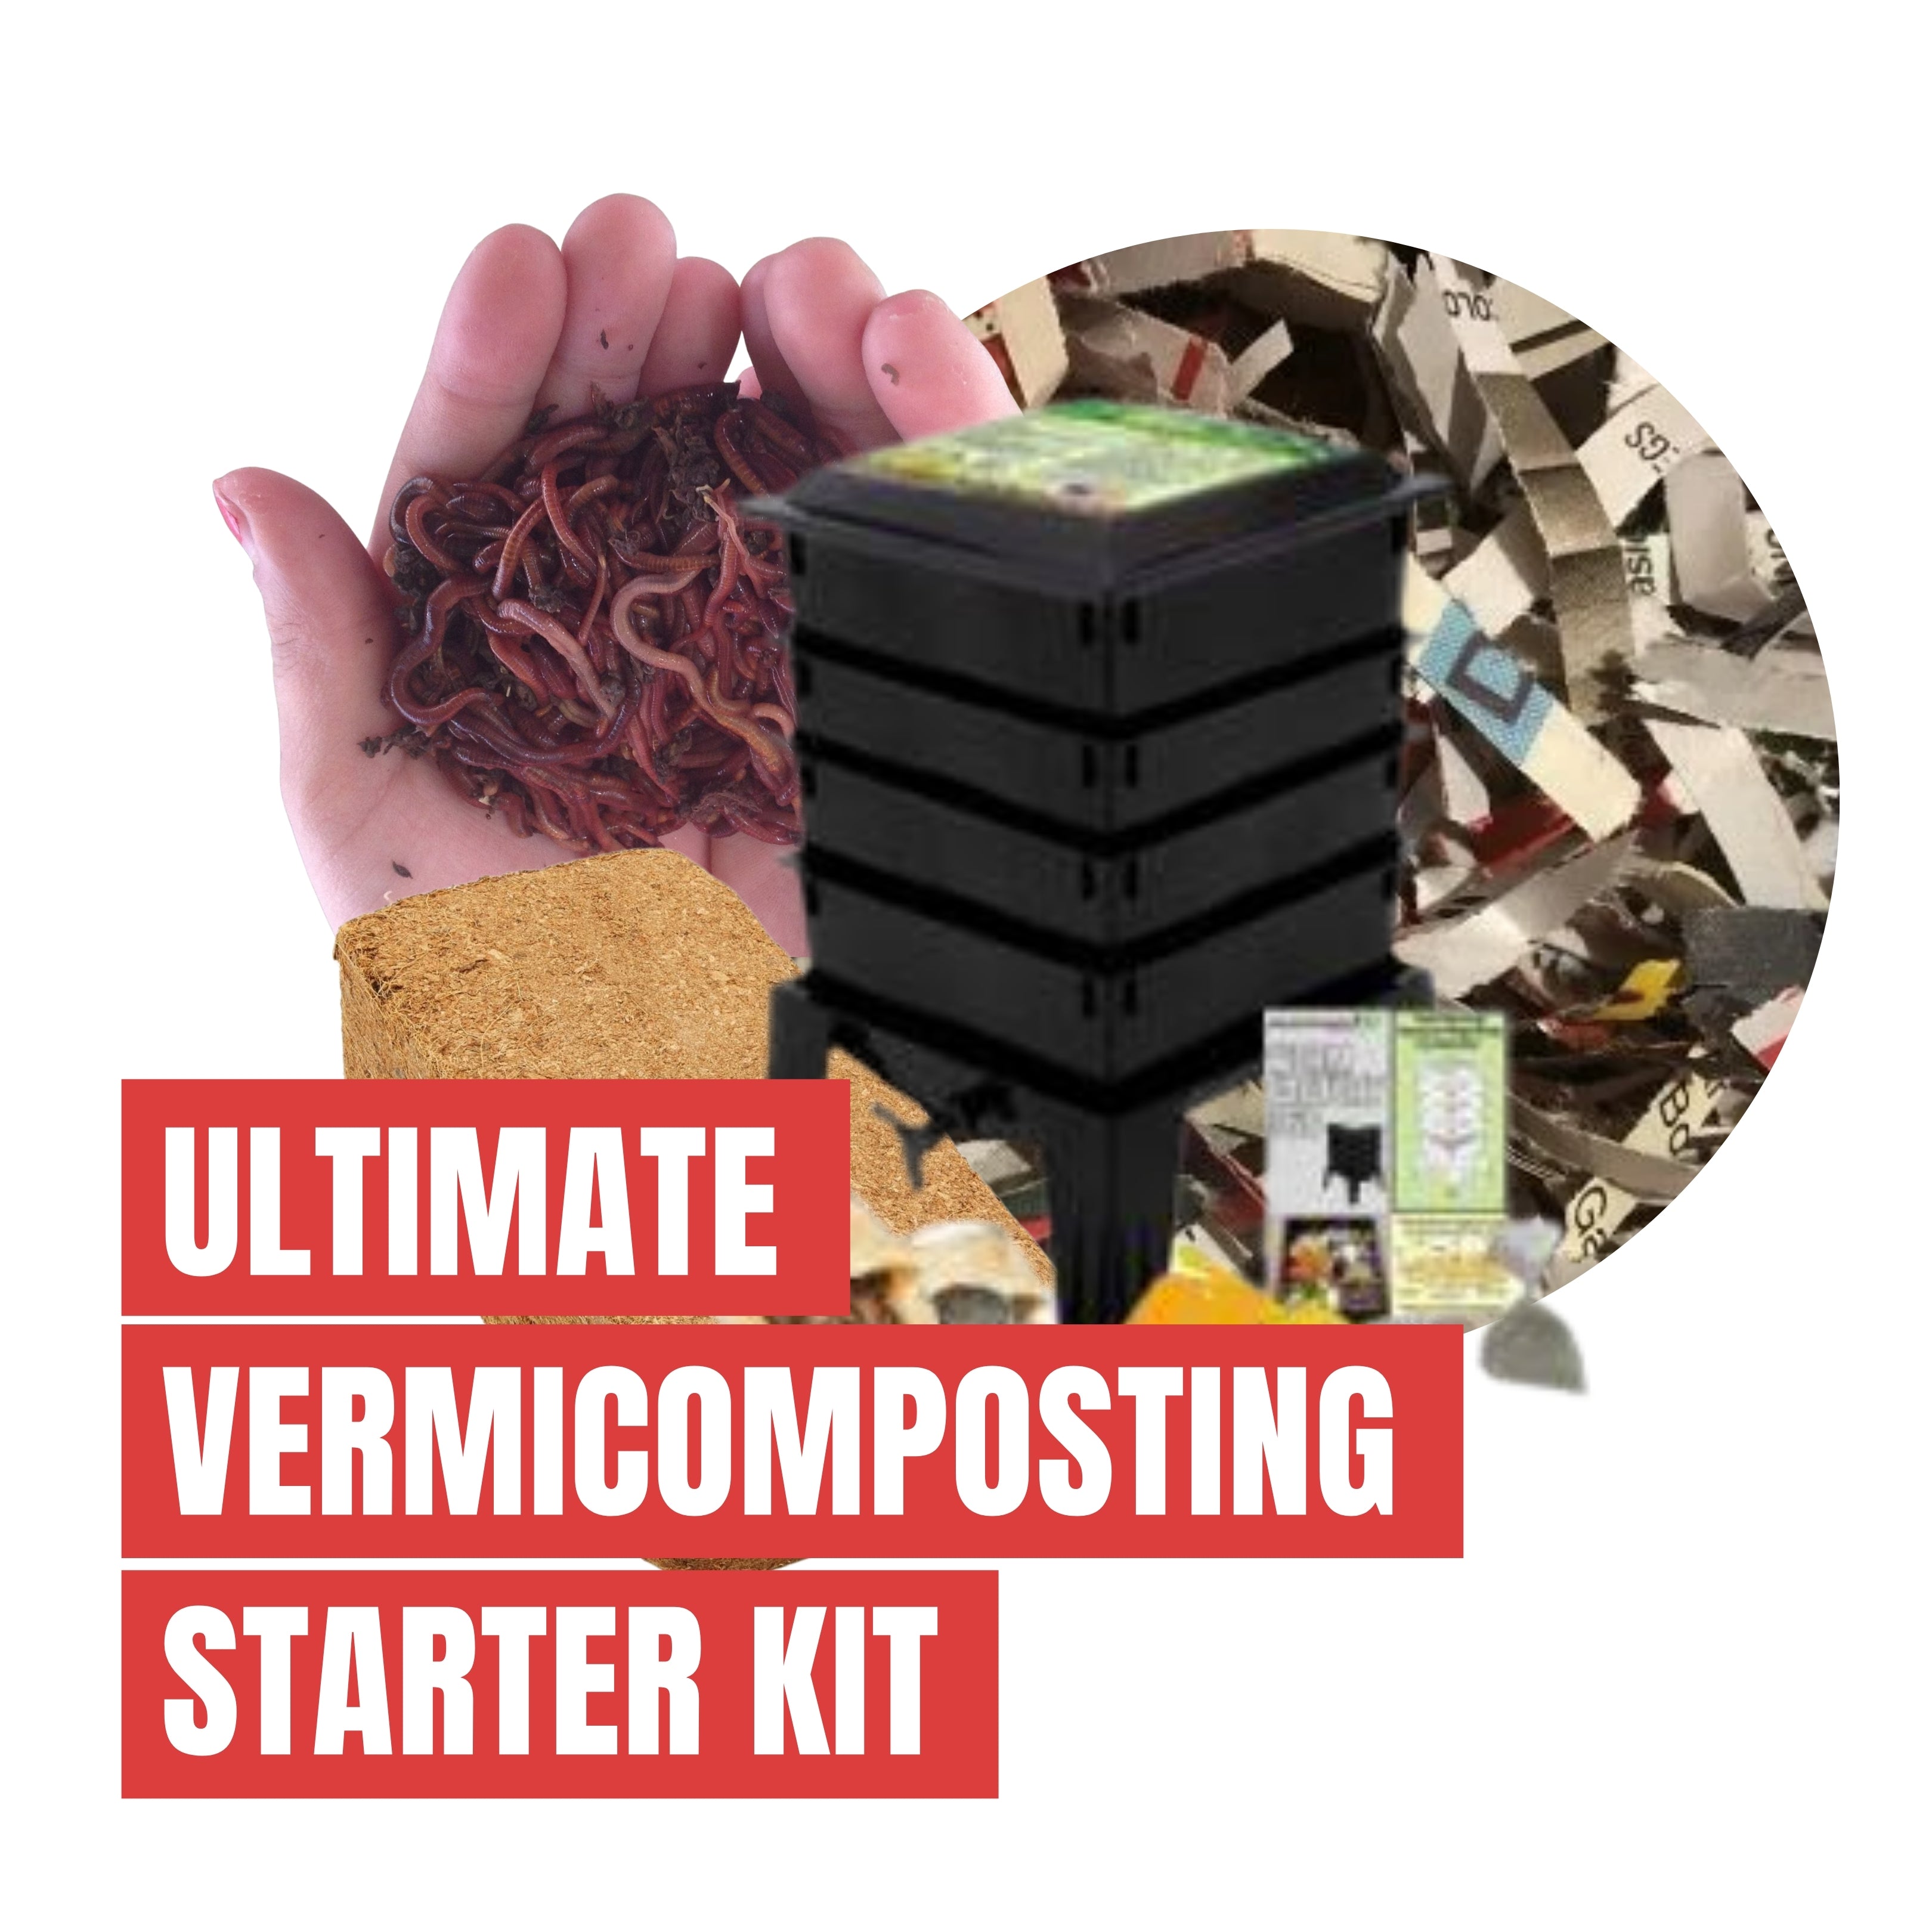 Product image of vermicomposting starter kit